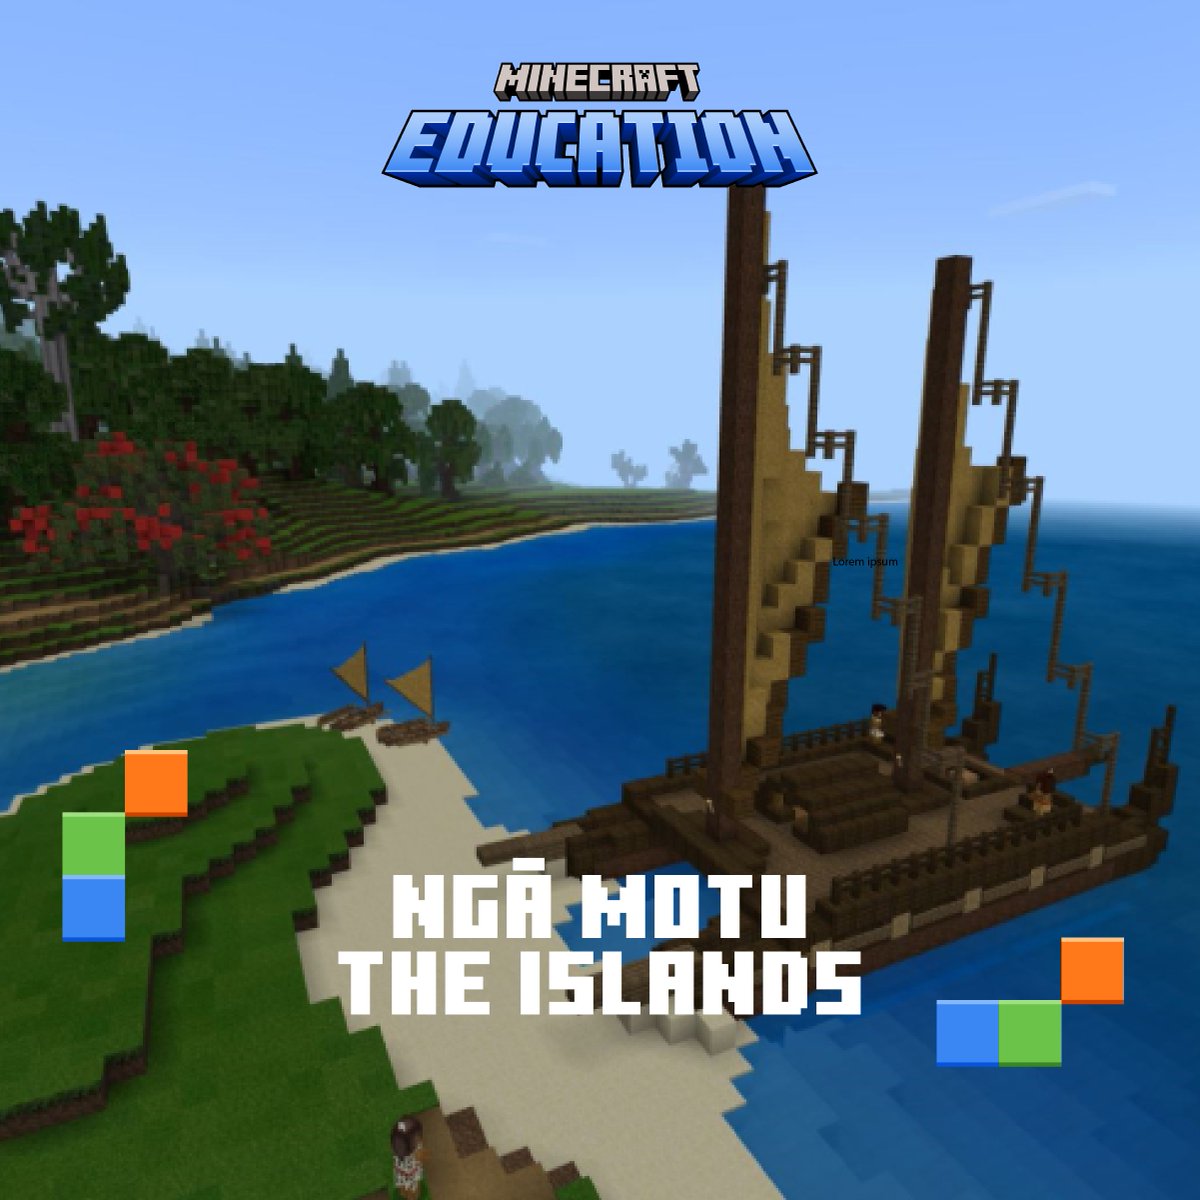 🌺 Embark on a cross-cultural adventure celebrating #Māori heritage with Ngā Motu, by #MinecraftEdu and @PikiStudios. Meet the giant moa bird, sail on Waka canoes, and explore Māori language and customs. Download for #AANHPIHM today! msft.it/6013YODiH 🐦